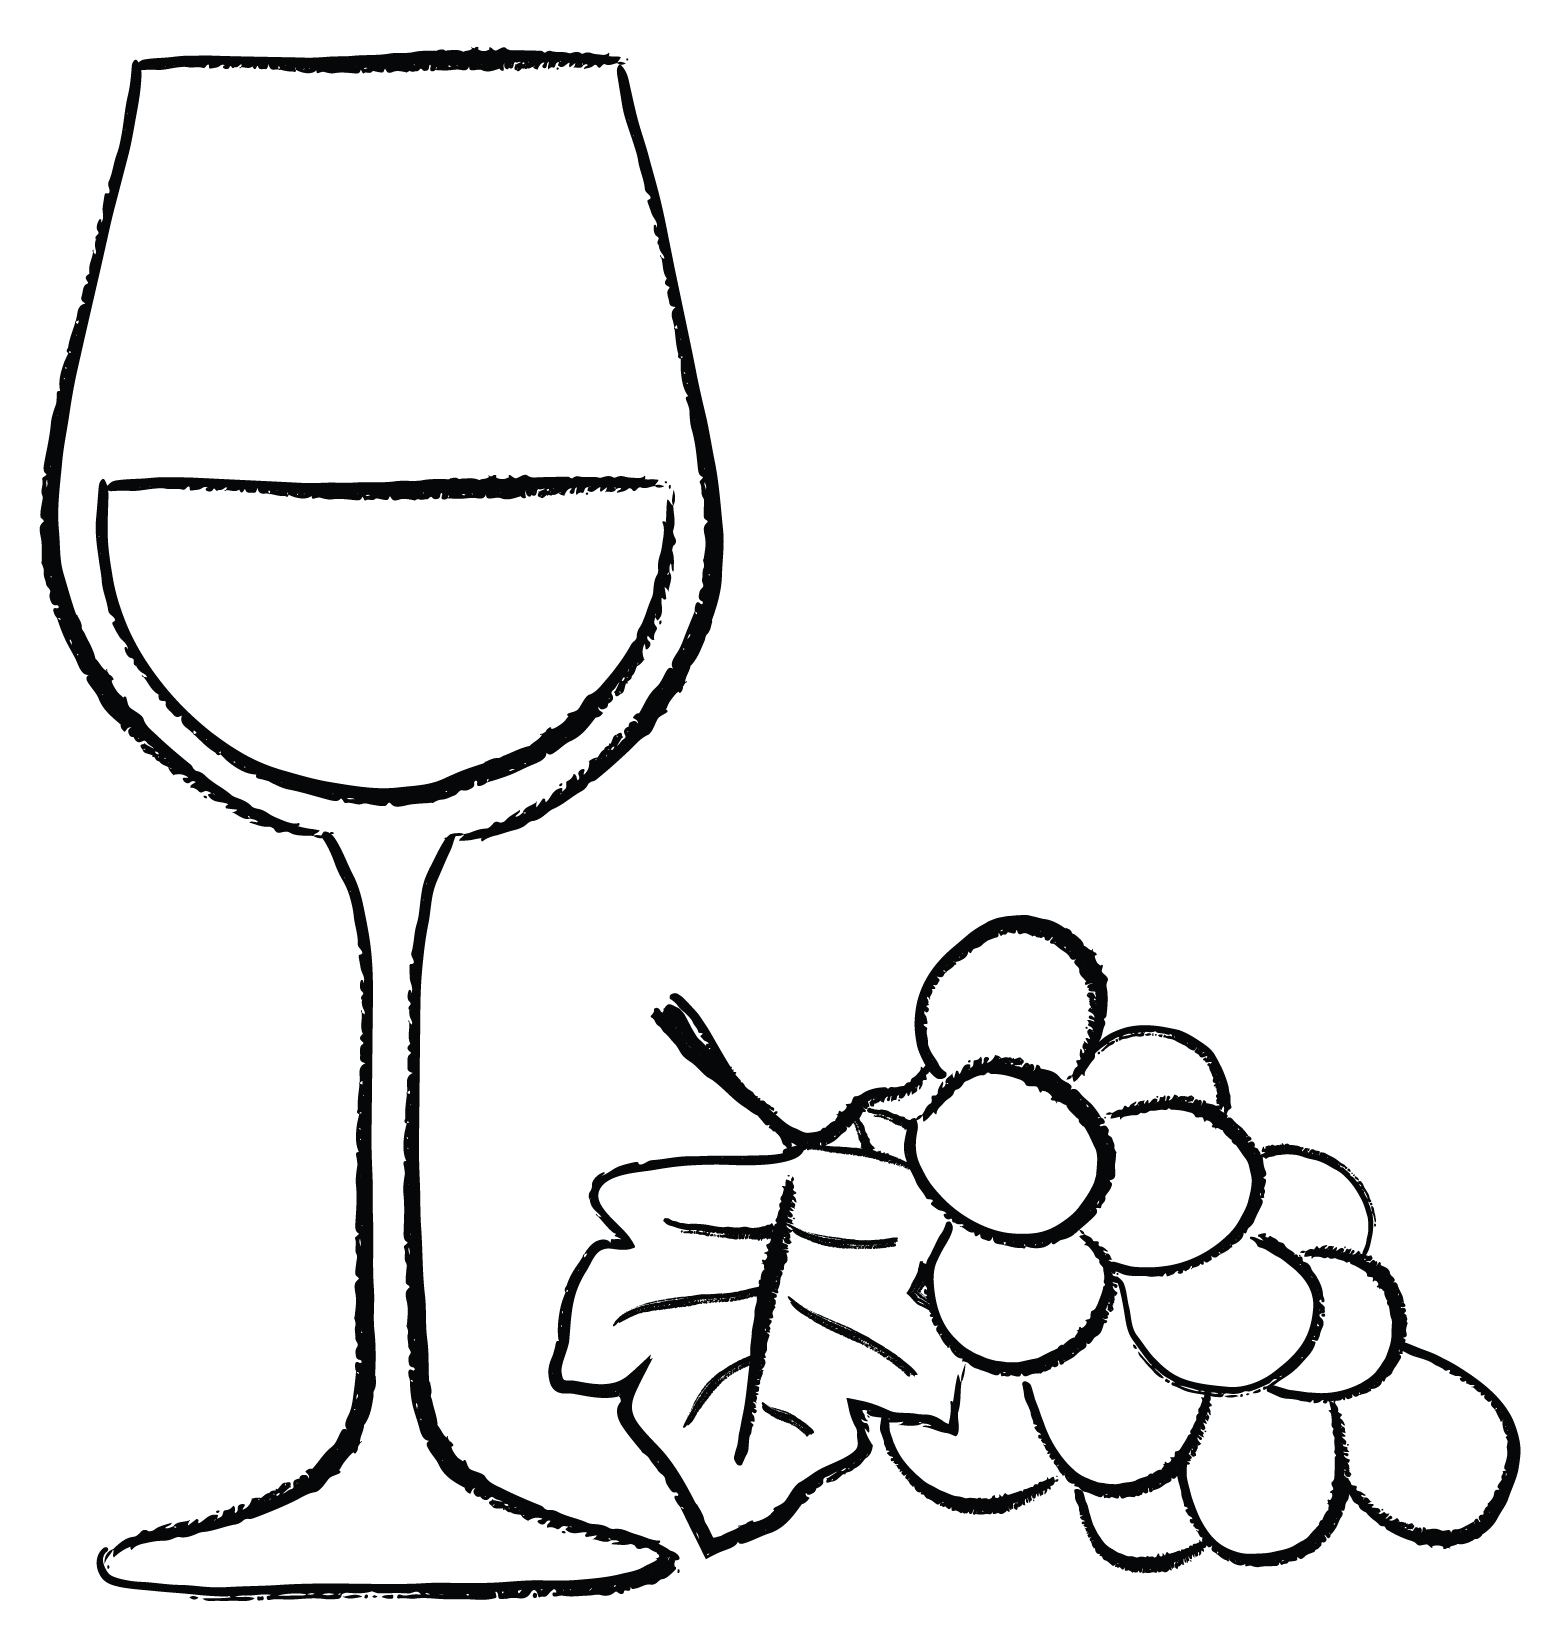 wine glass with grapes illustration